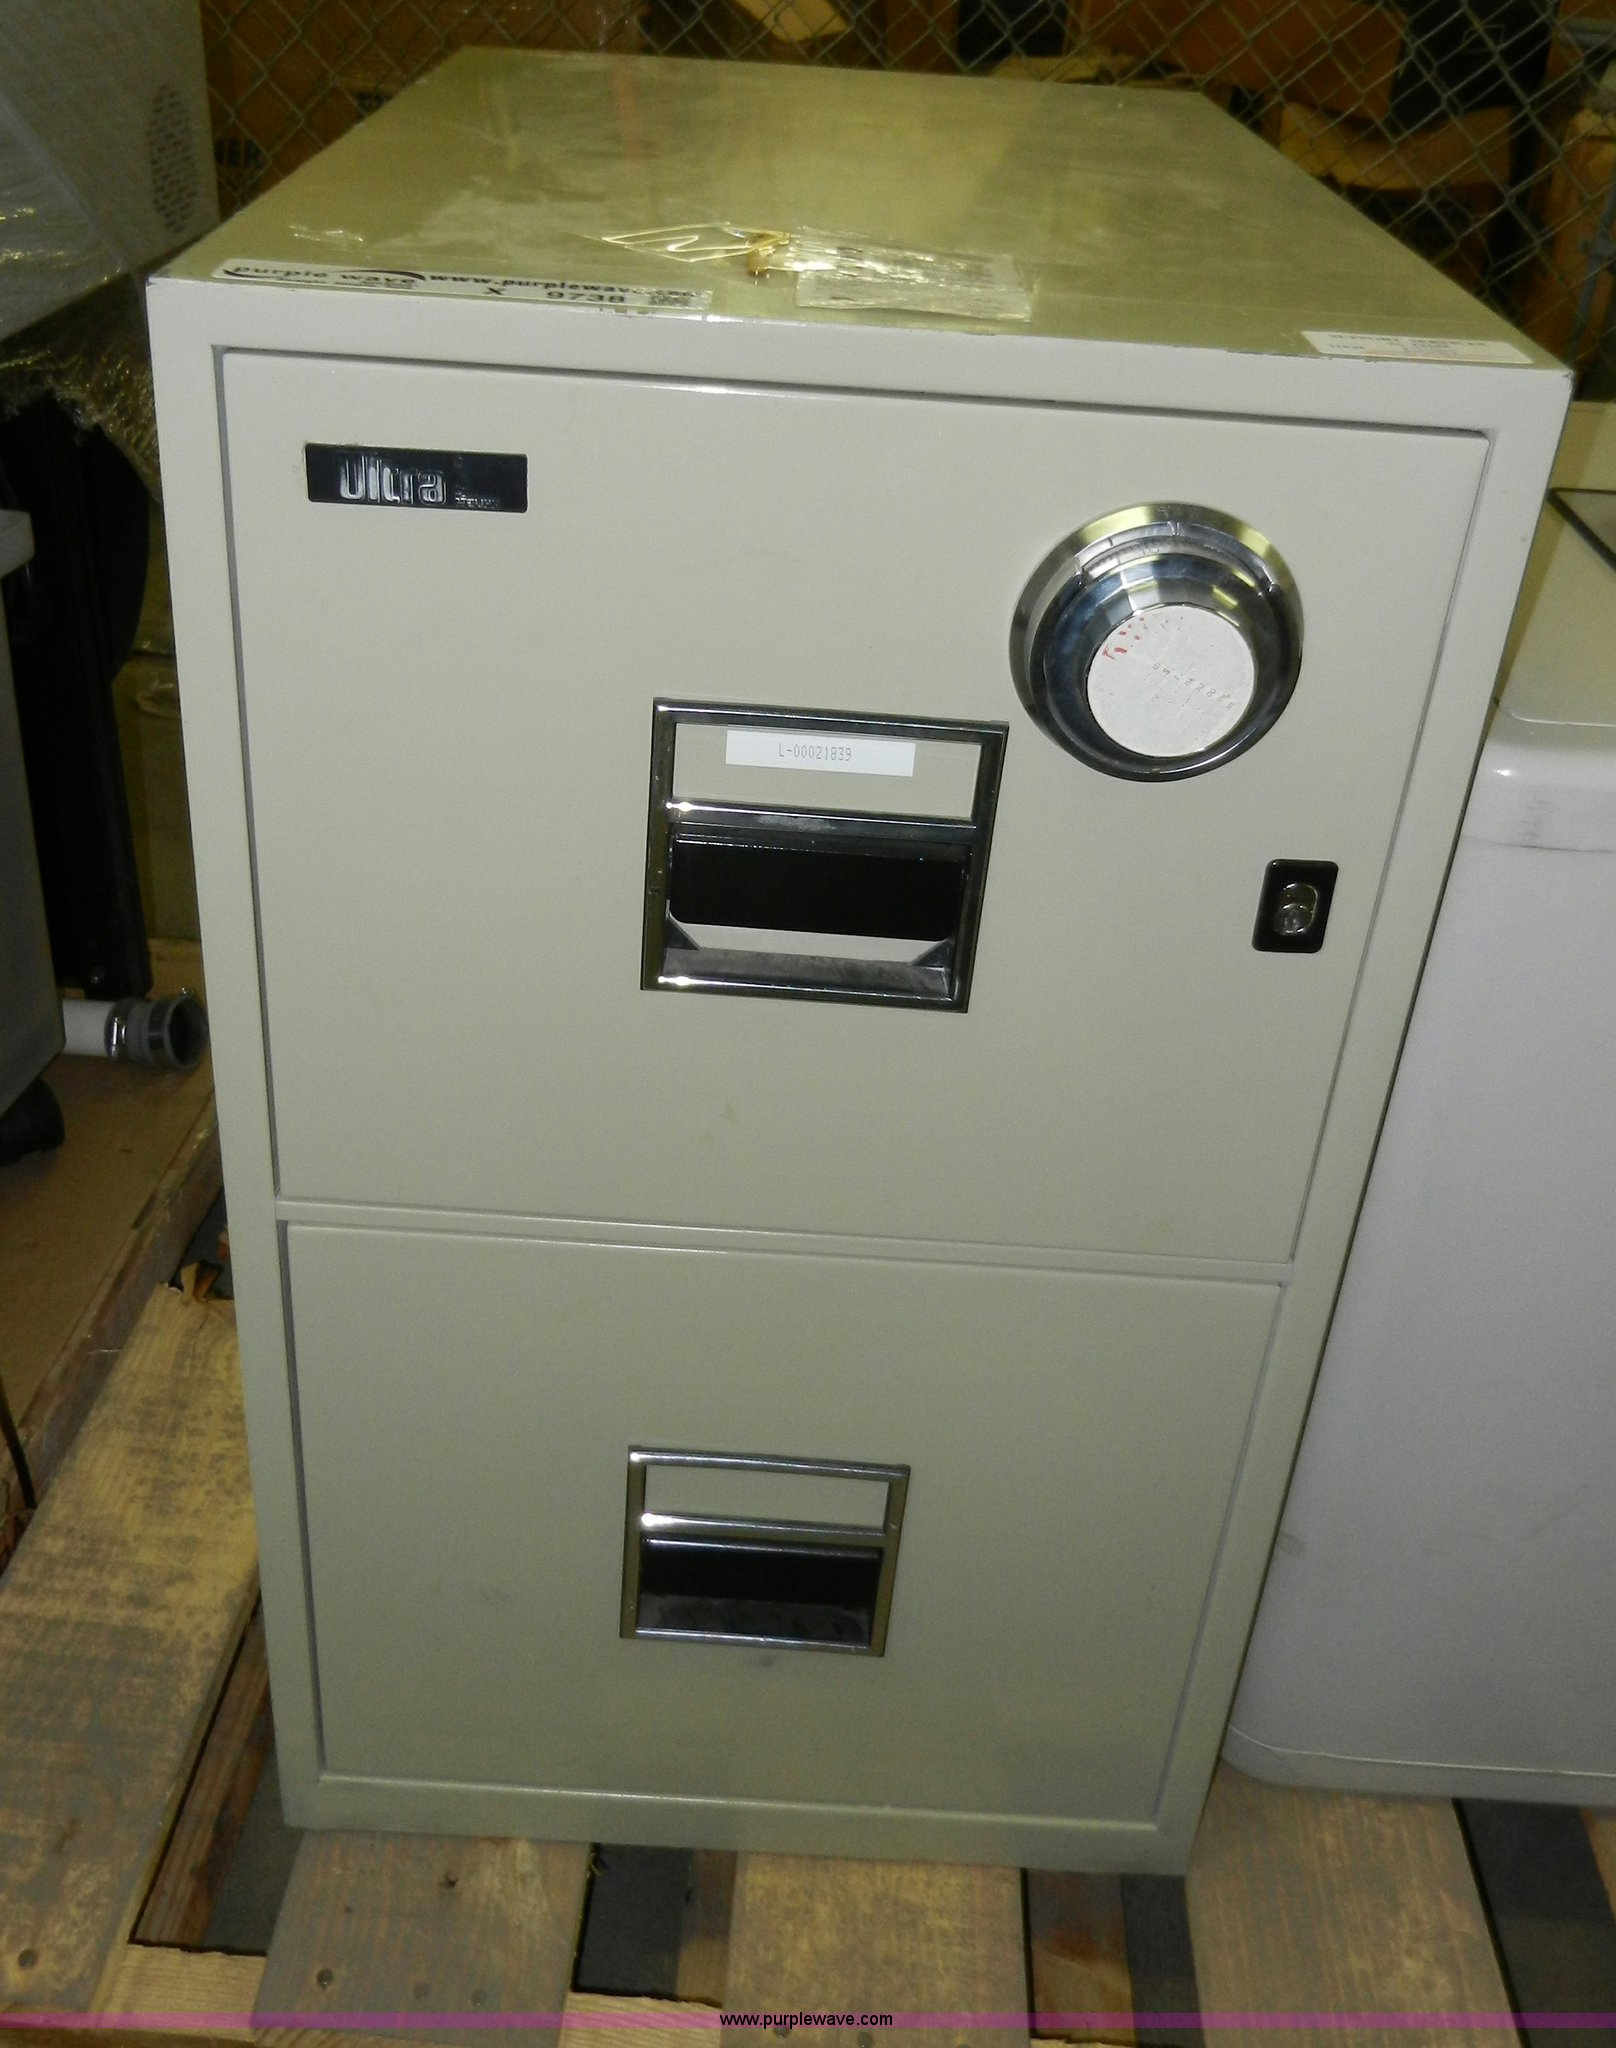 Meilink Psx52lt Combination File Cabinet Item X9738 Sold intended for size 1616 X 2048